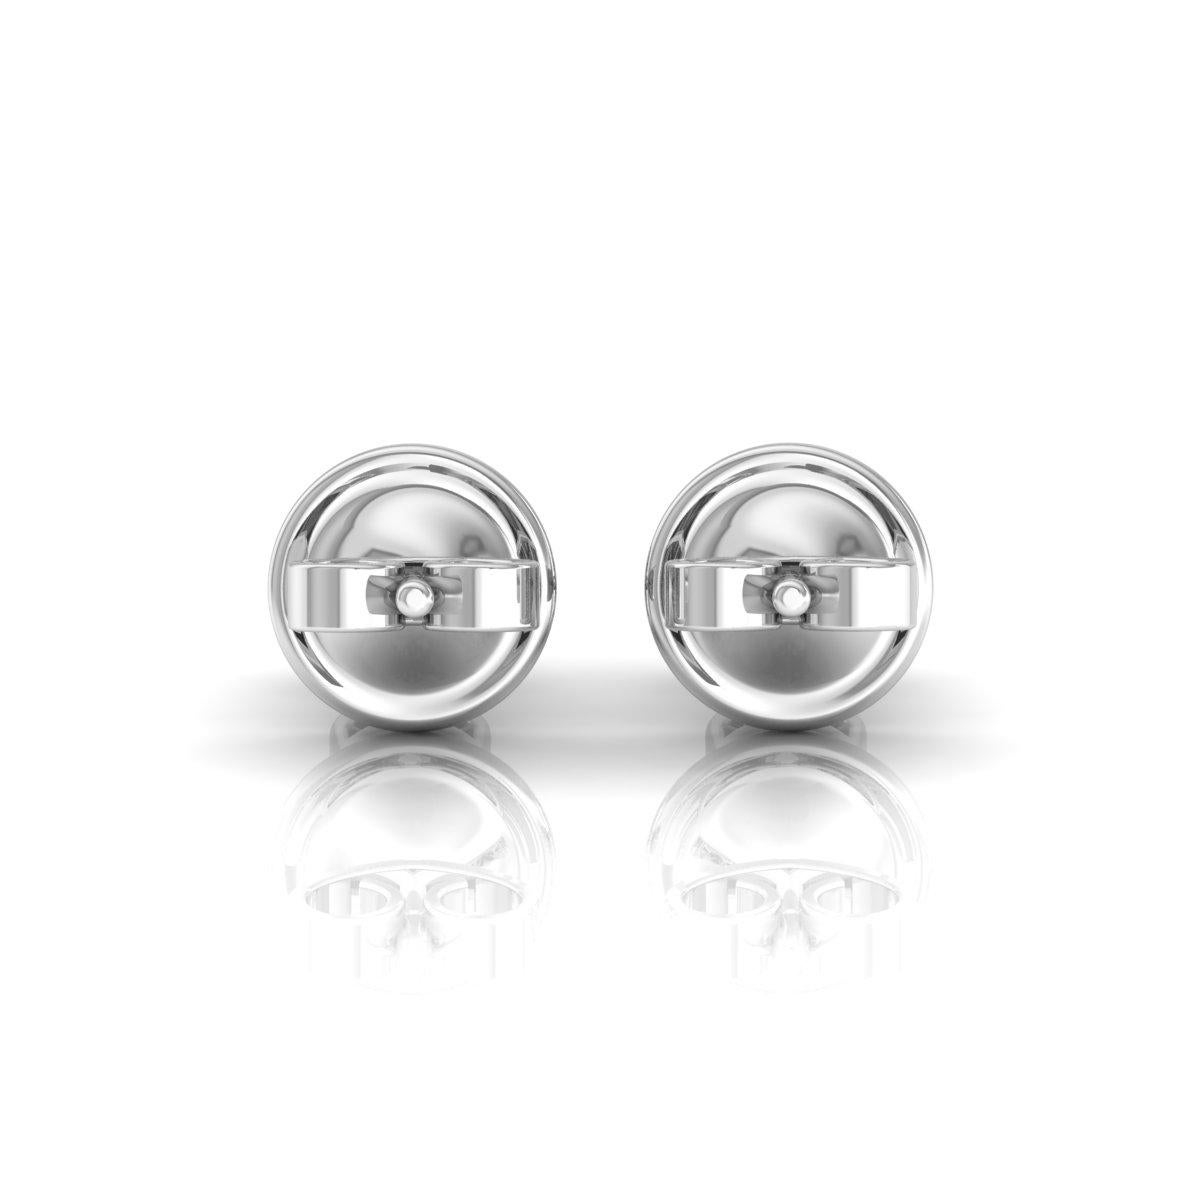 0.2 Carat SI Clarity HI Color Diamond Stud Earrings Solid 10k White Gold Jewelry For Sale 3